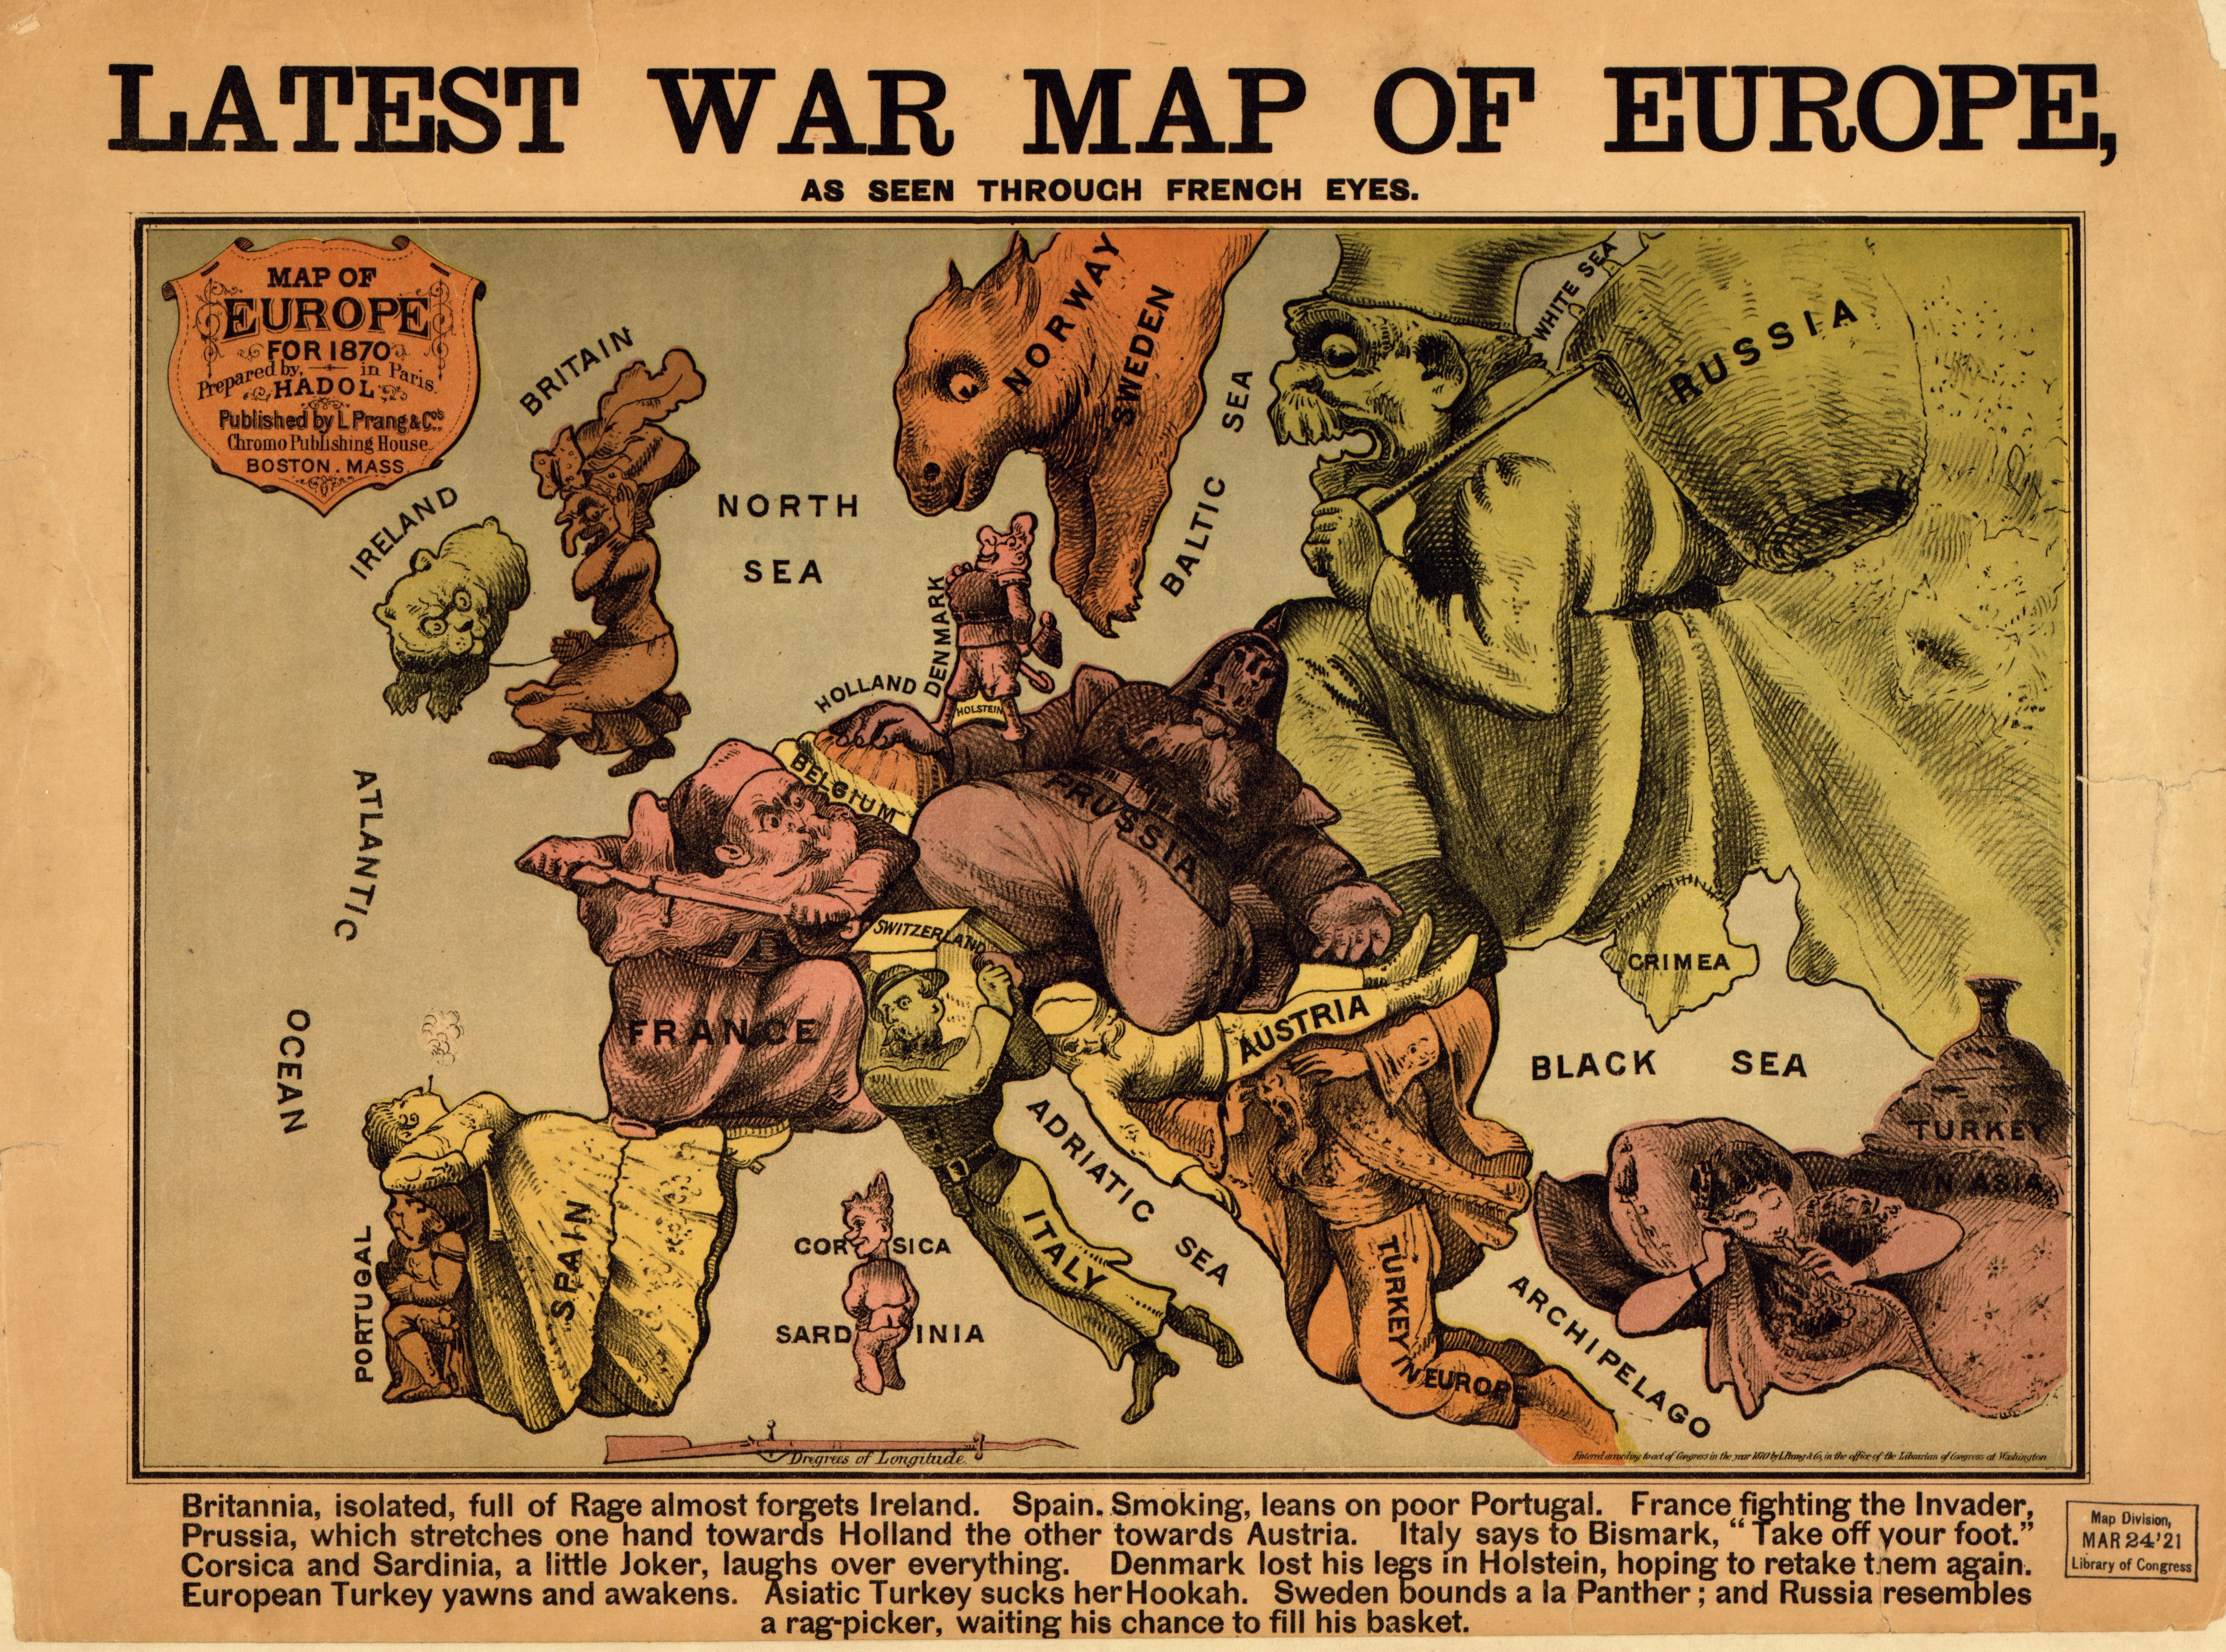 Latest War Map of Europe as seen through French Eyes. 1870